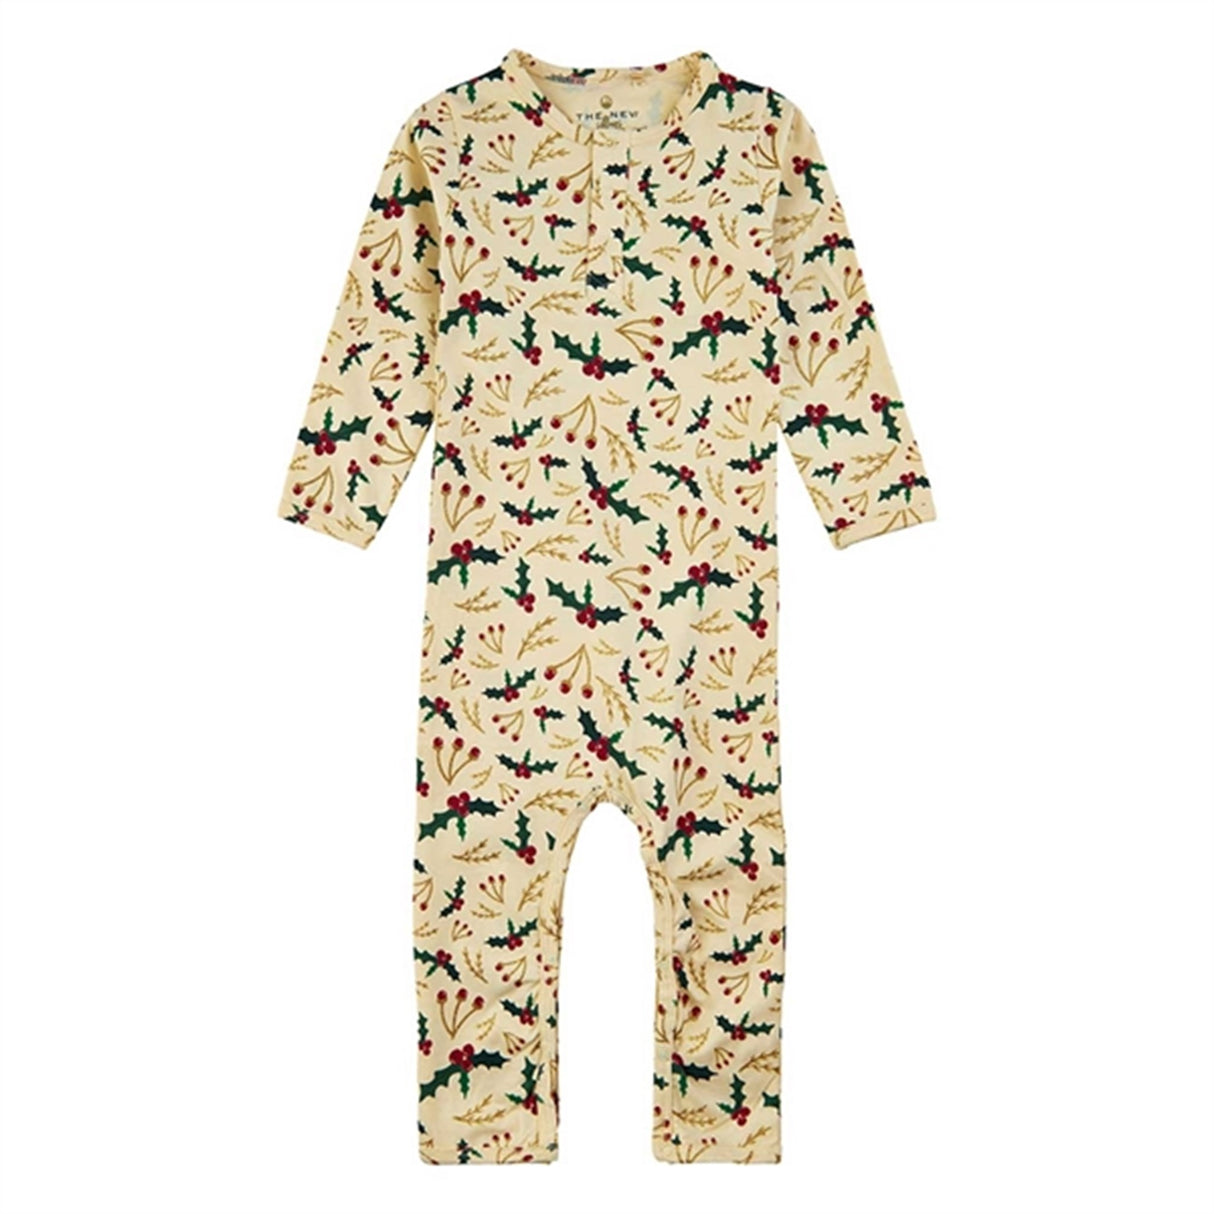 The New Siblings Mistel Aop Holiday Jumpsuit